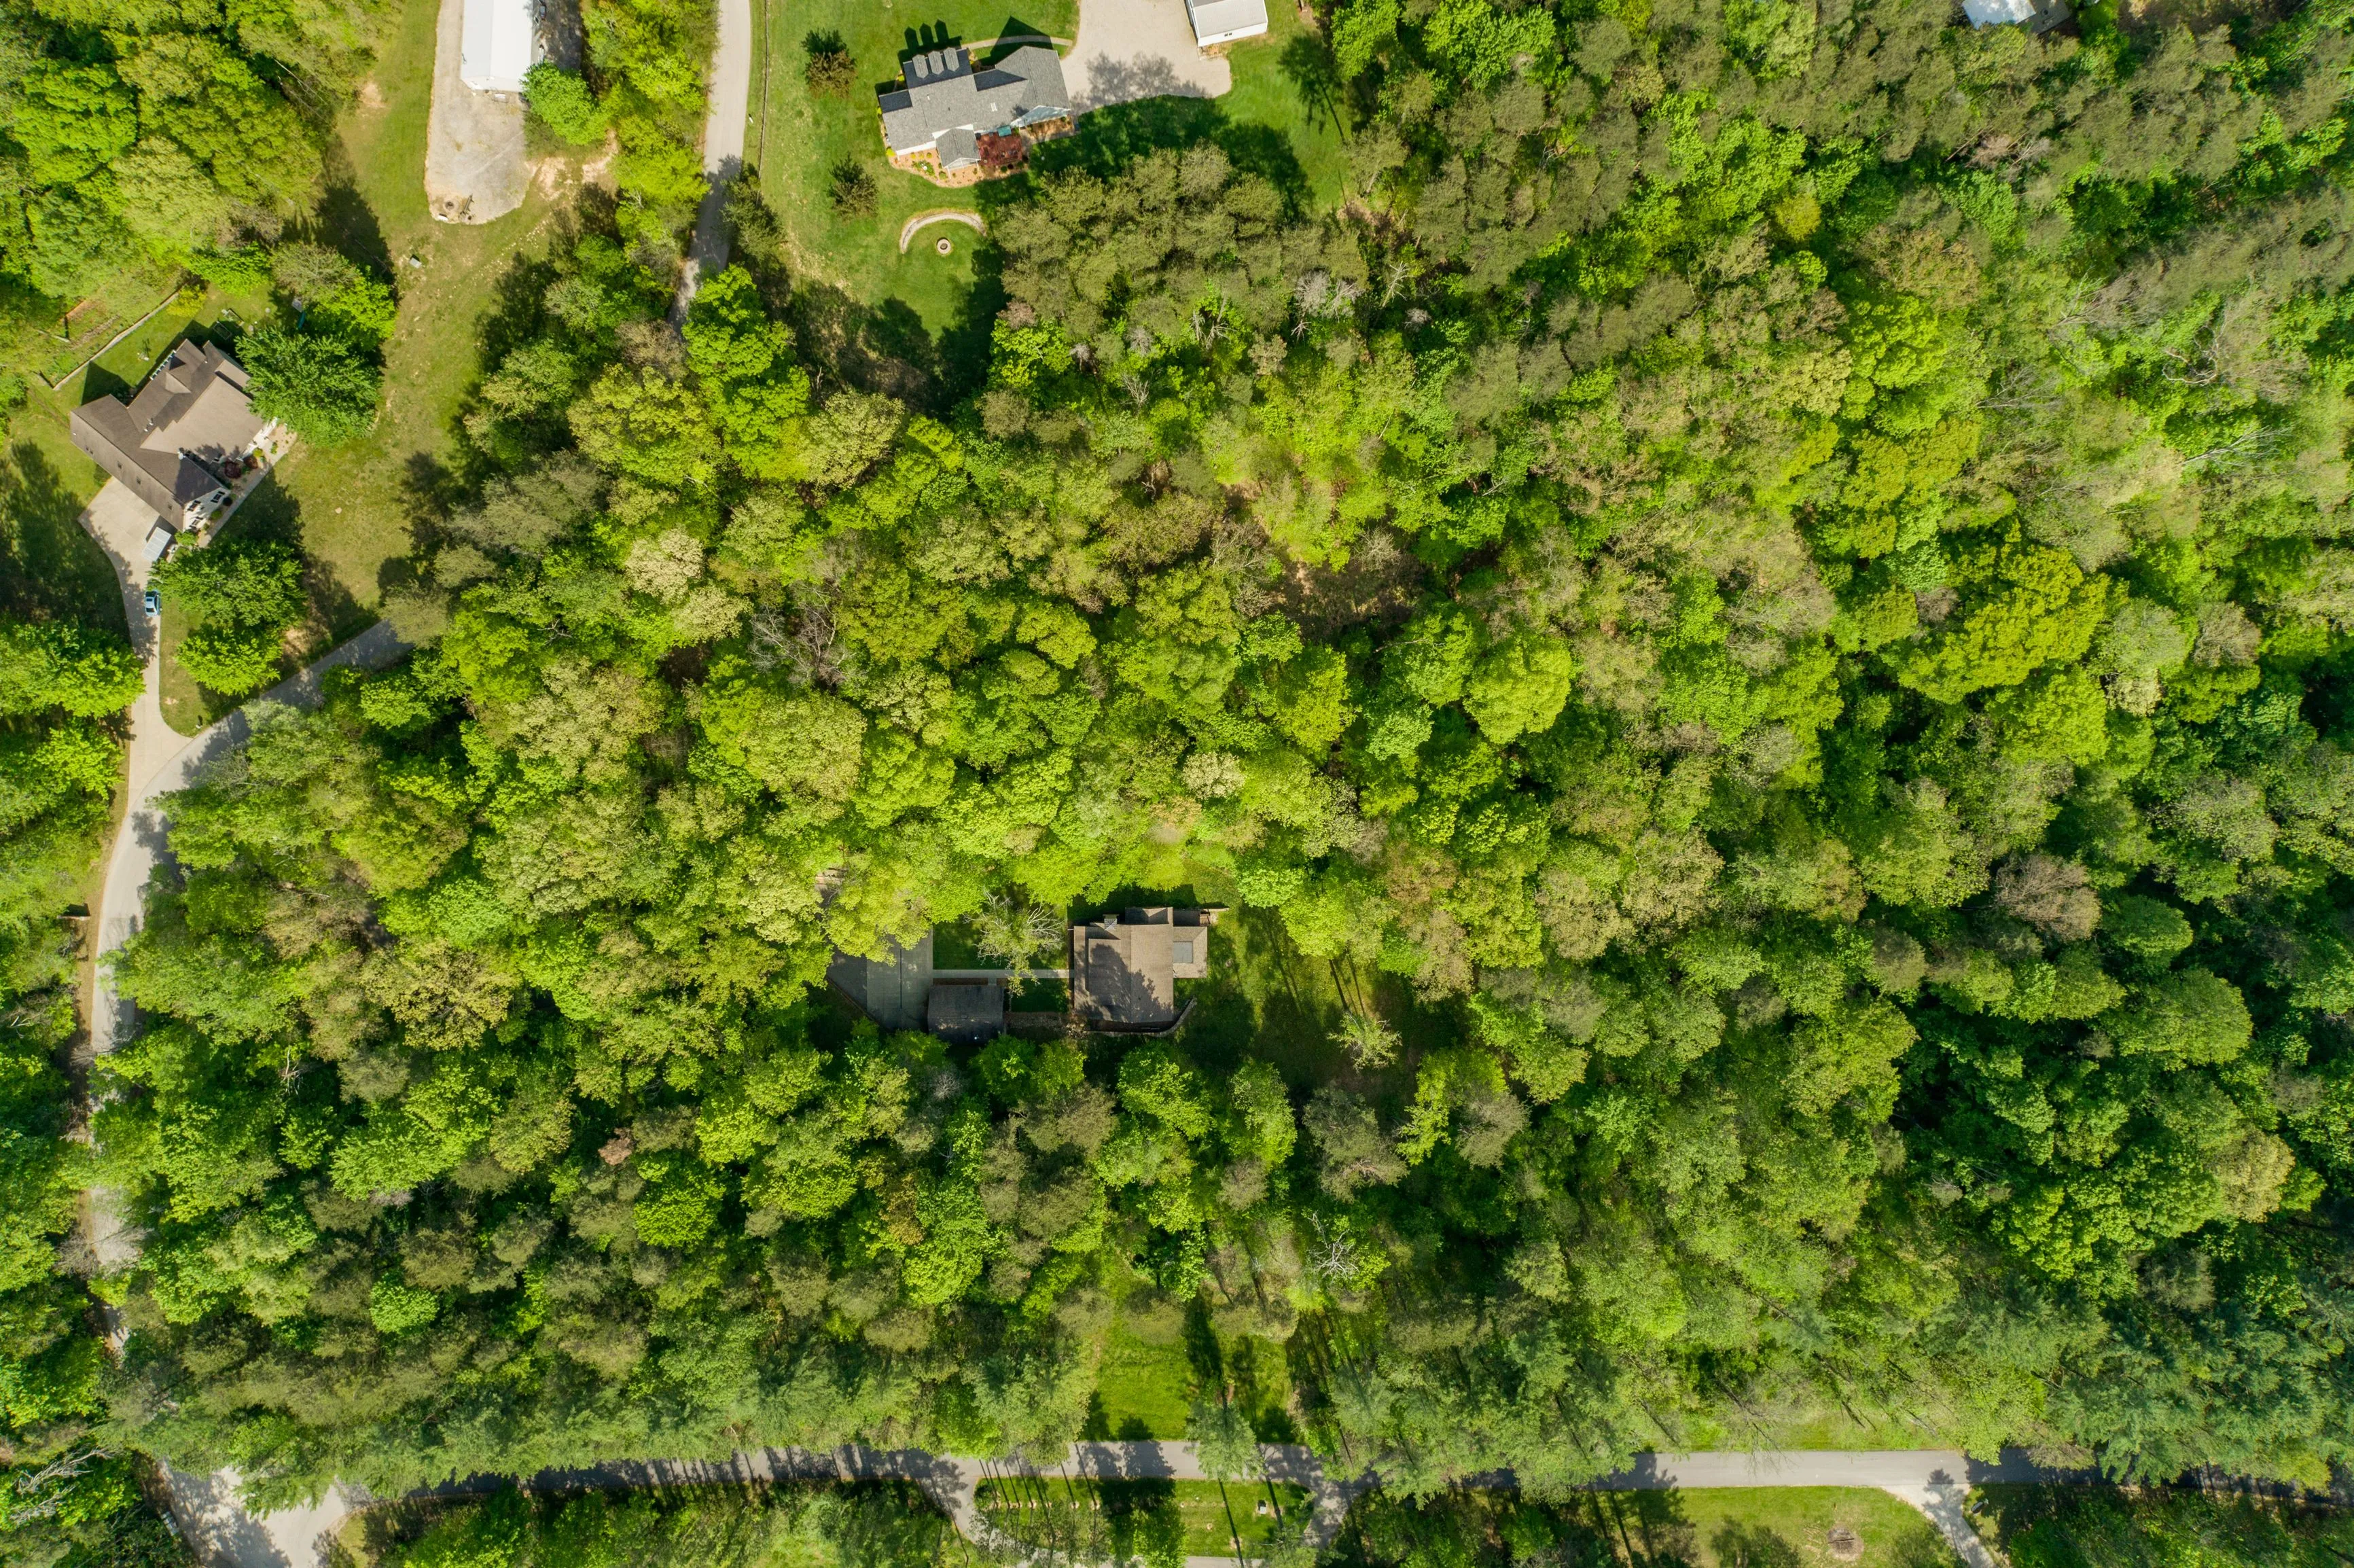 Aerial view of a lush green forest with a few houses partially hidden by the tree canopy, intersected by walking paths.